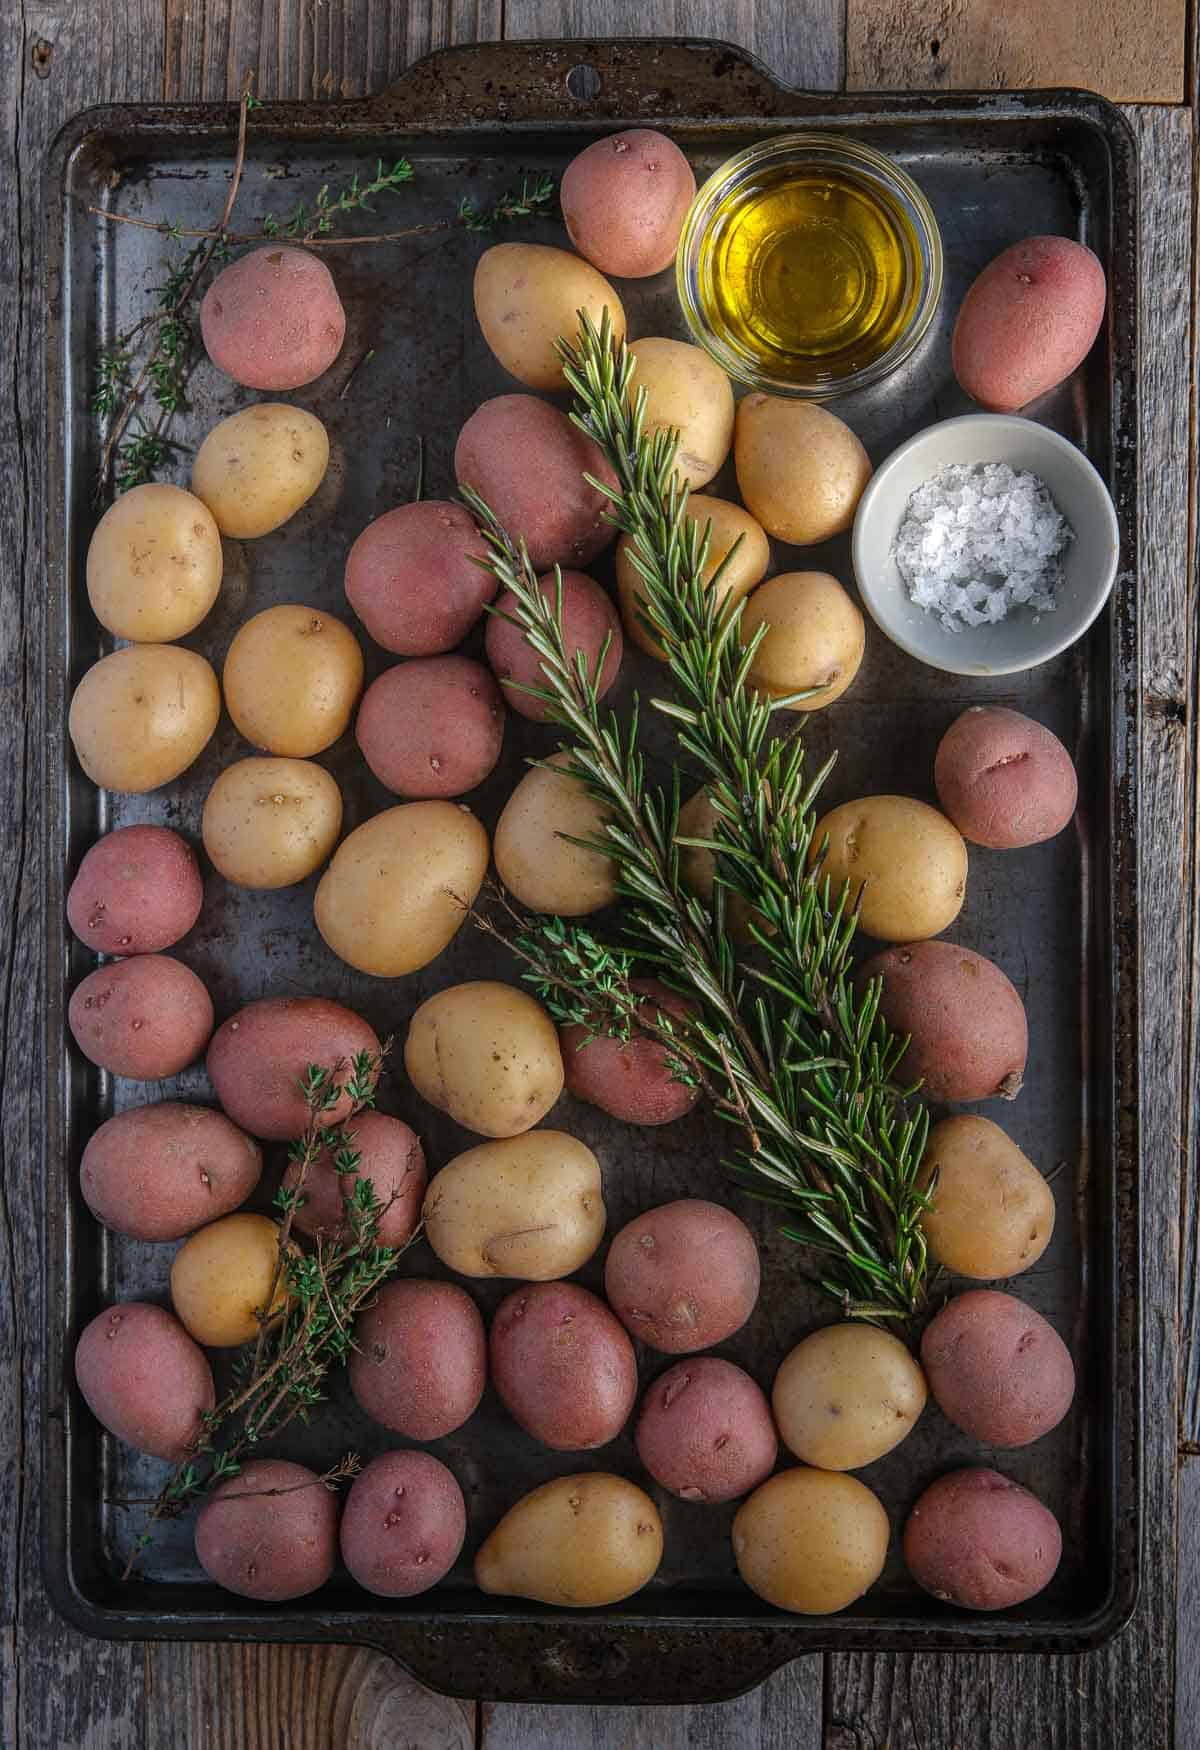 Ingredients for breakfast roasted potatoes on a sheet pan, including Yukon gold potatoes, olive oil, kosher salt, and fresh herbs